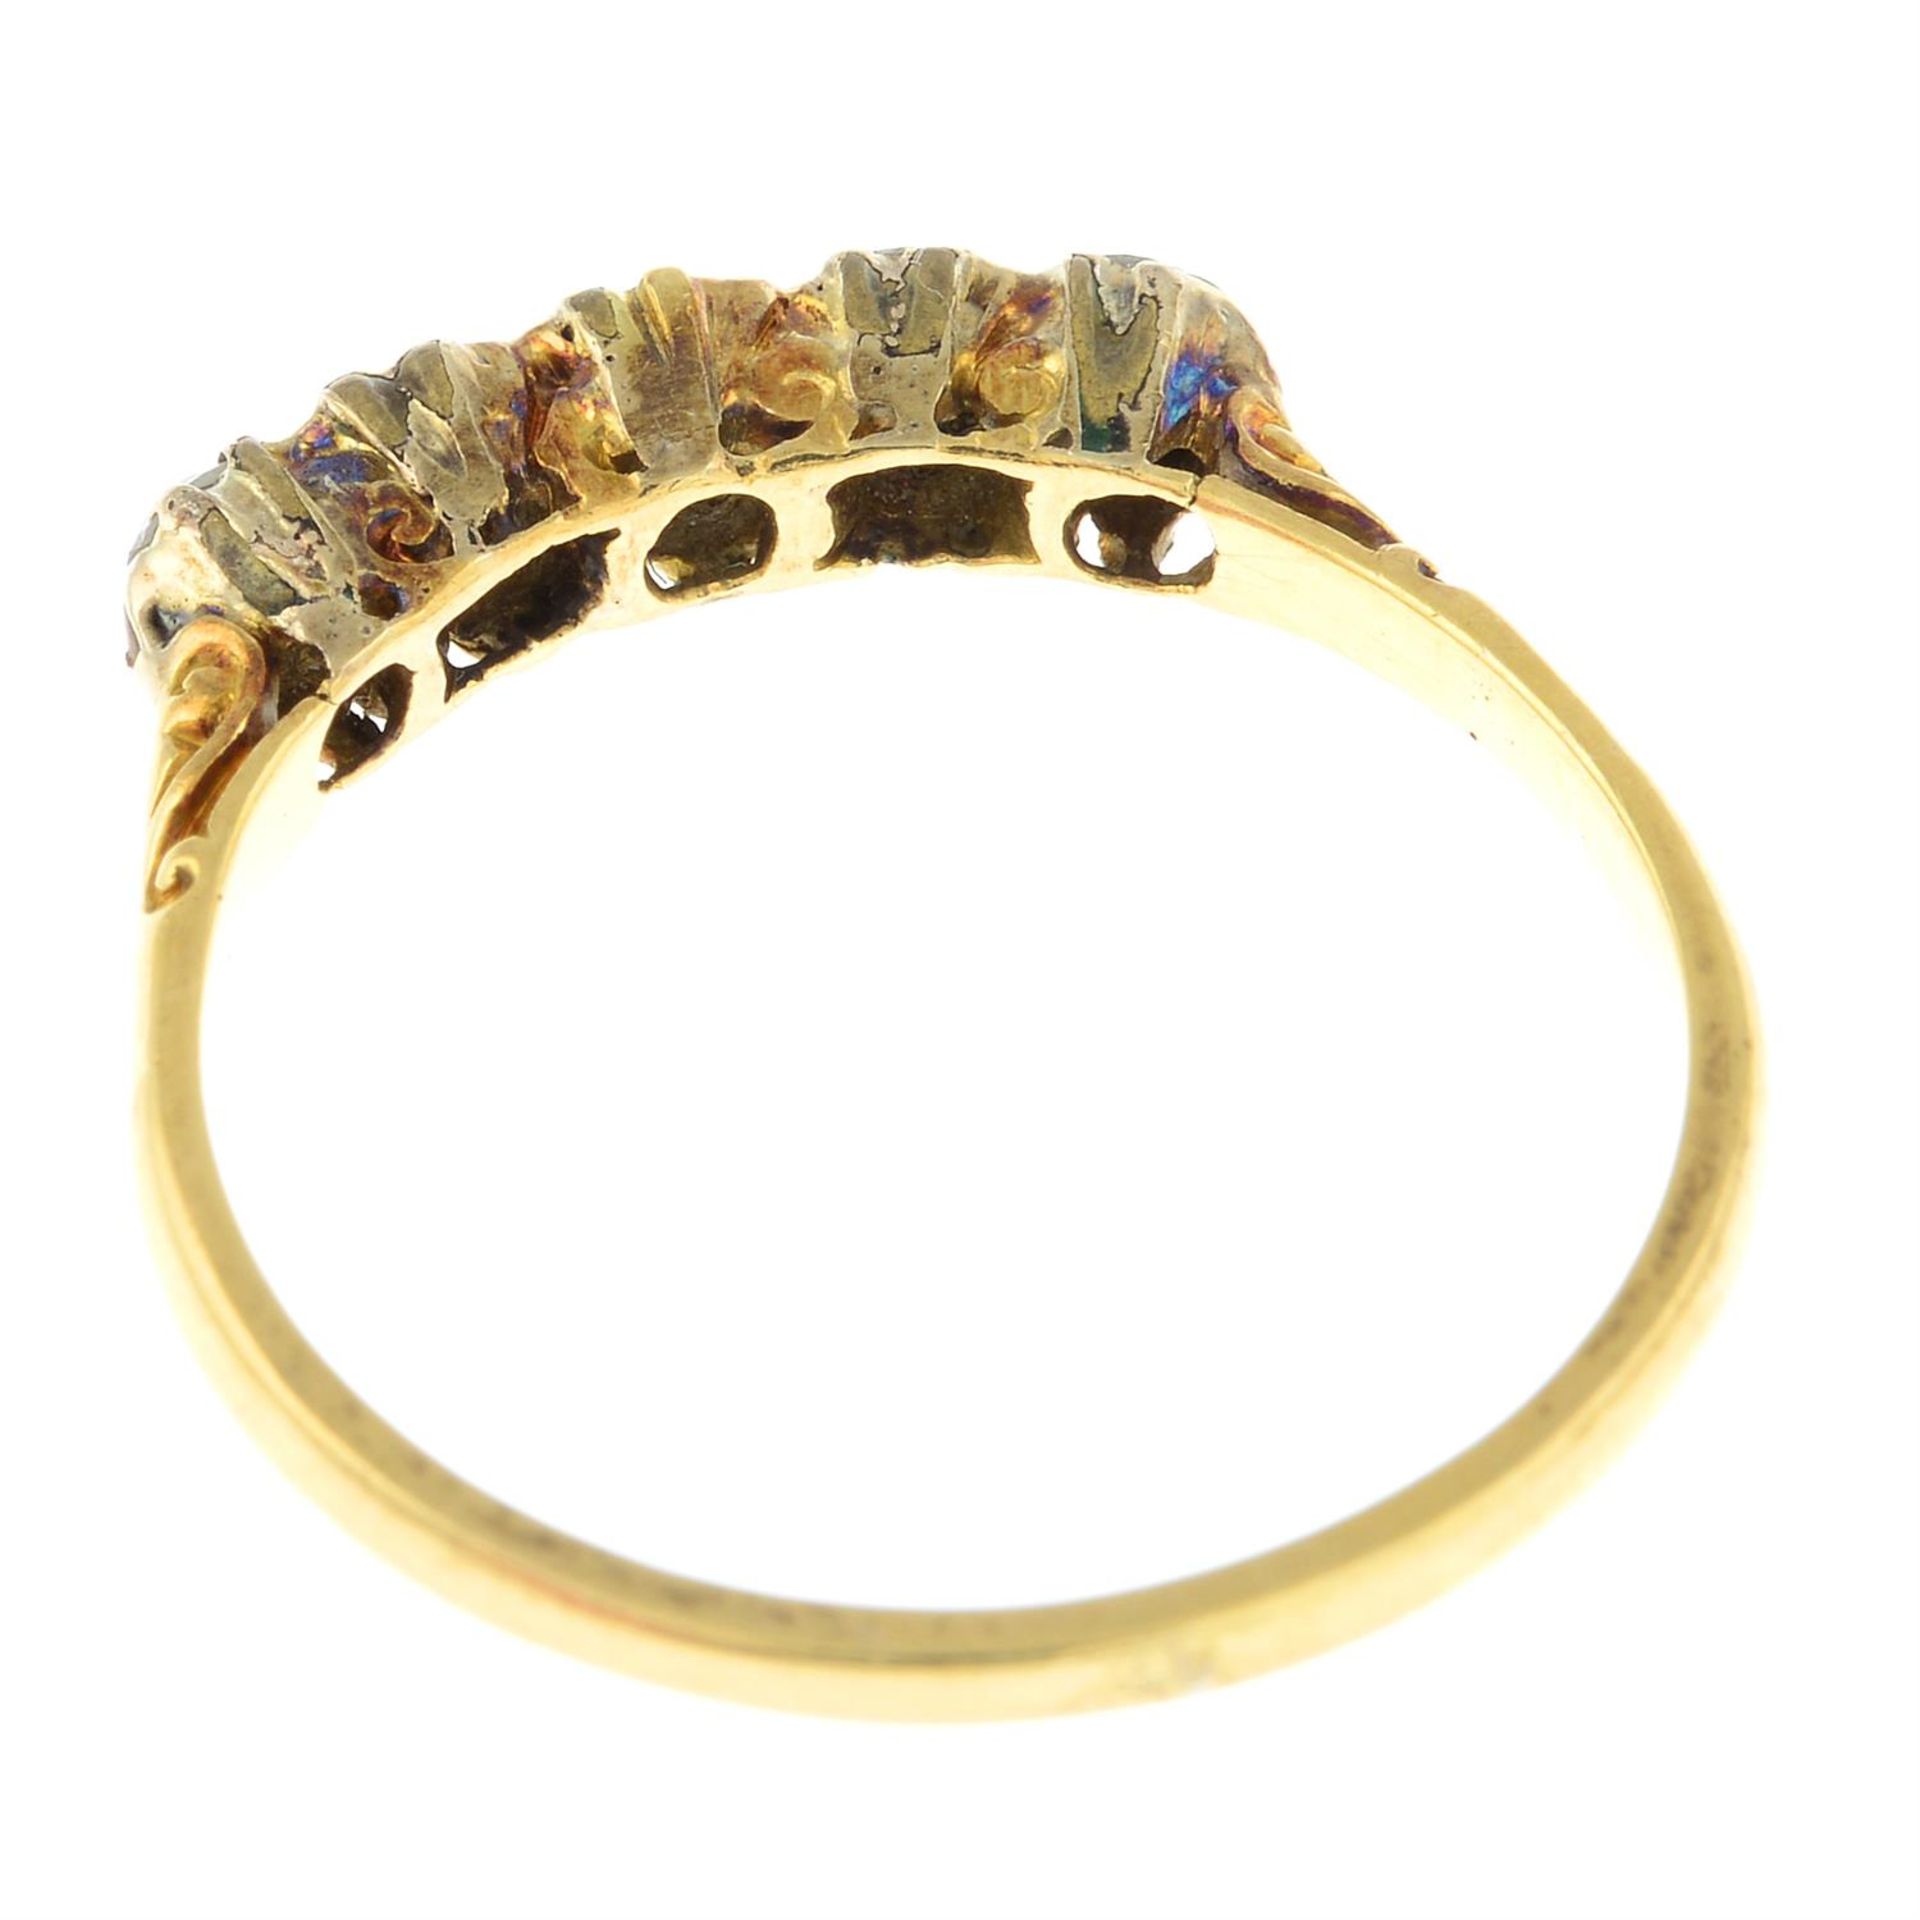 An Late Victorian 18ct gold old-cut diamond five-stone ring. - Image 2 of 2